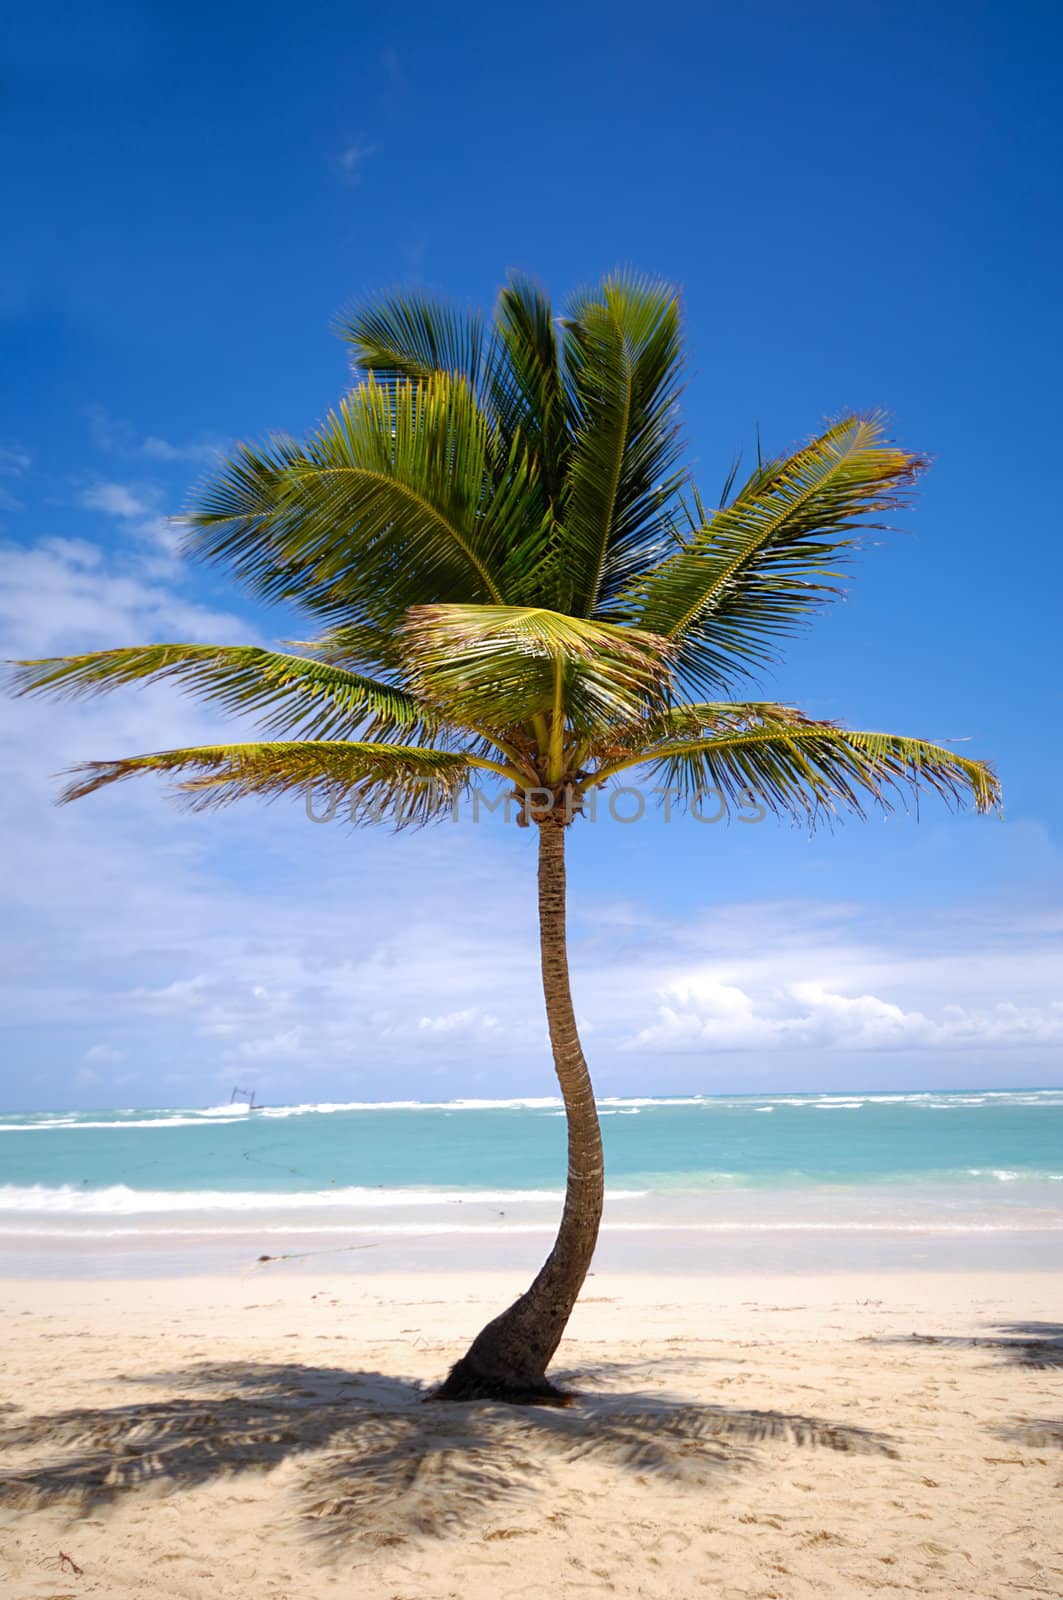 An exotic beach with a palm. In the bacground you can see the white beach and the ocean.